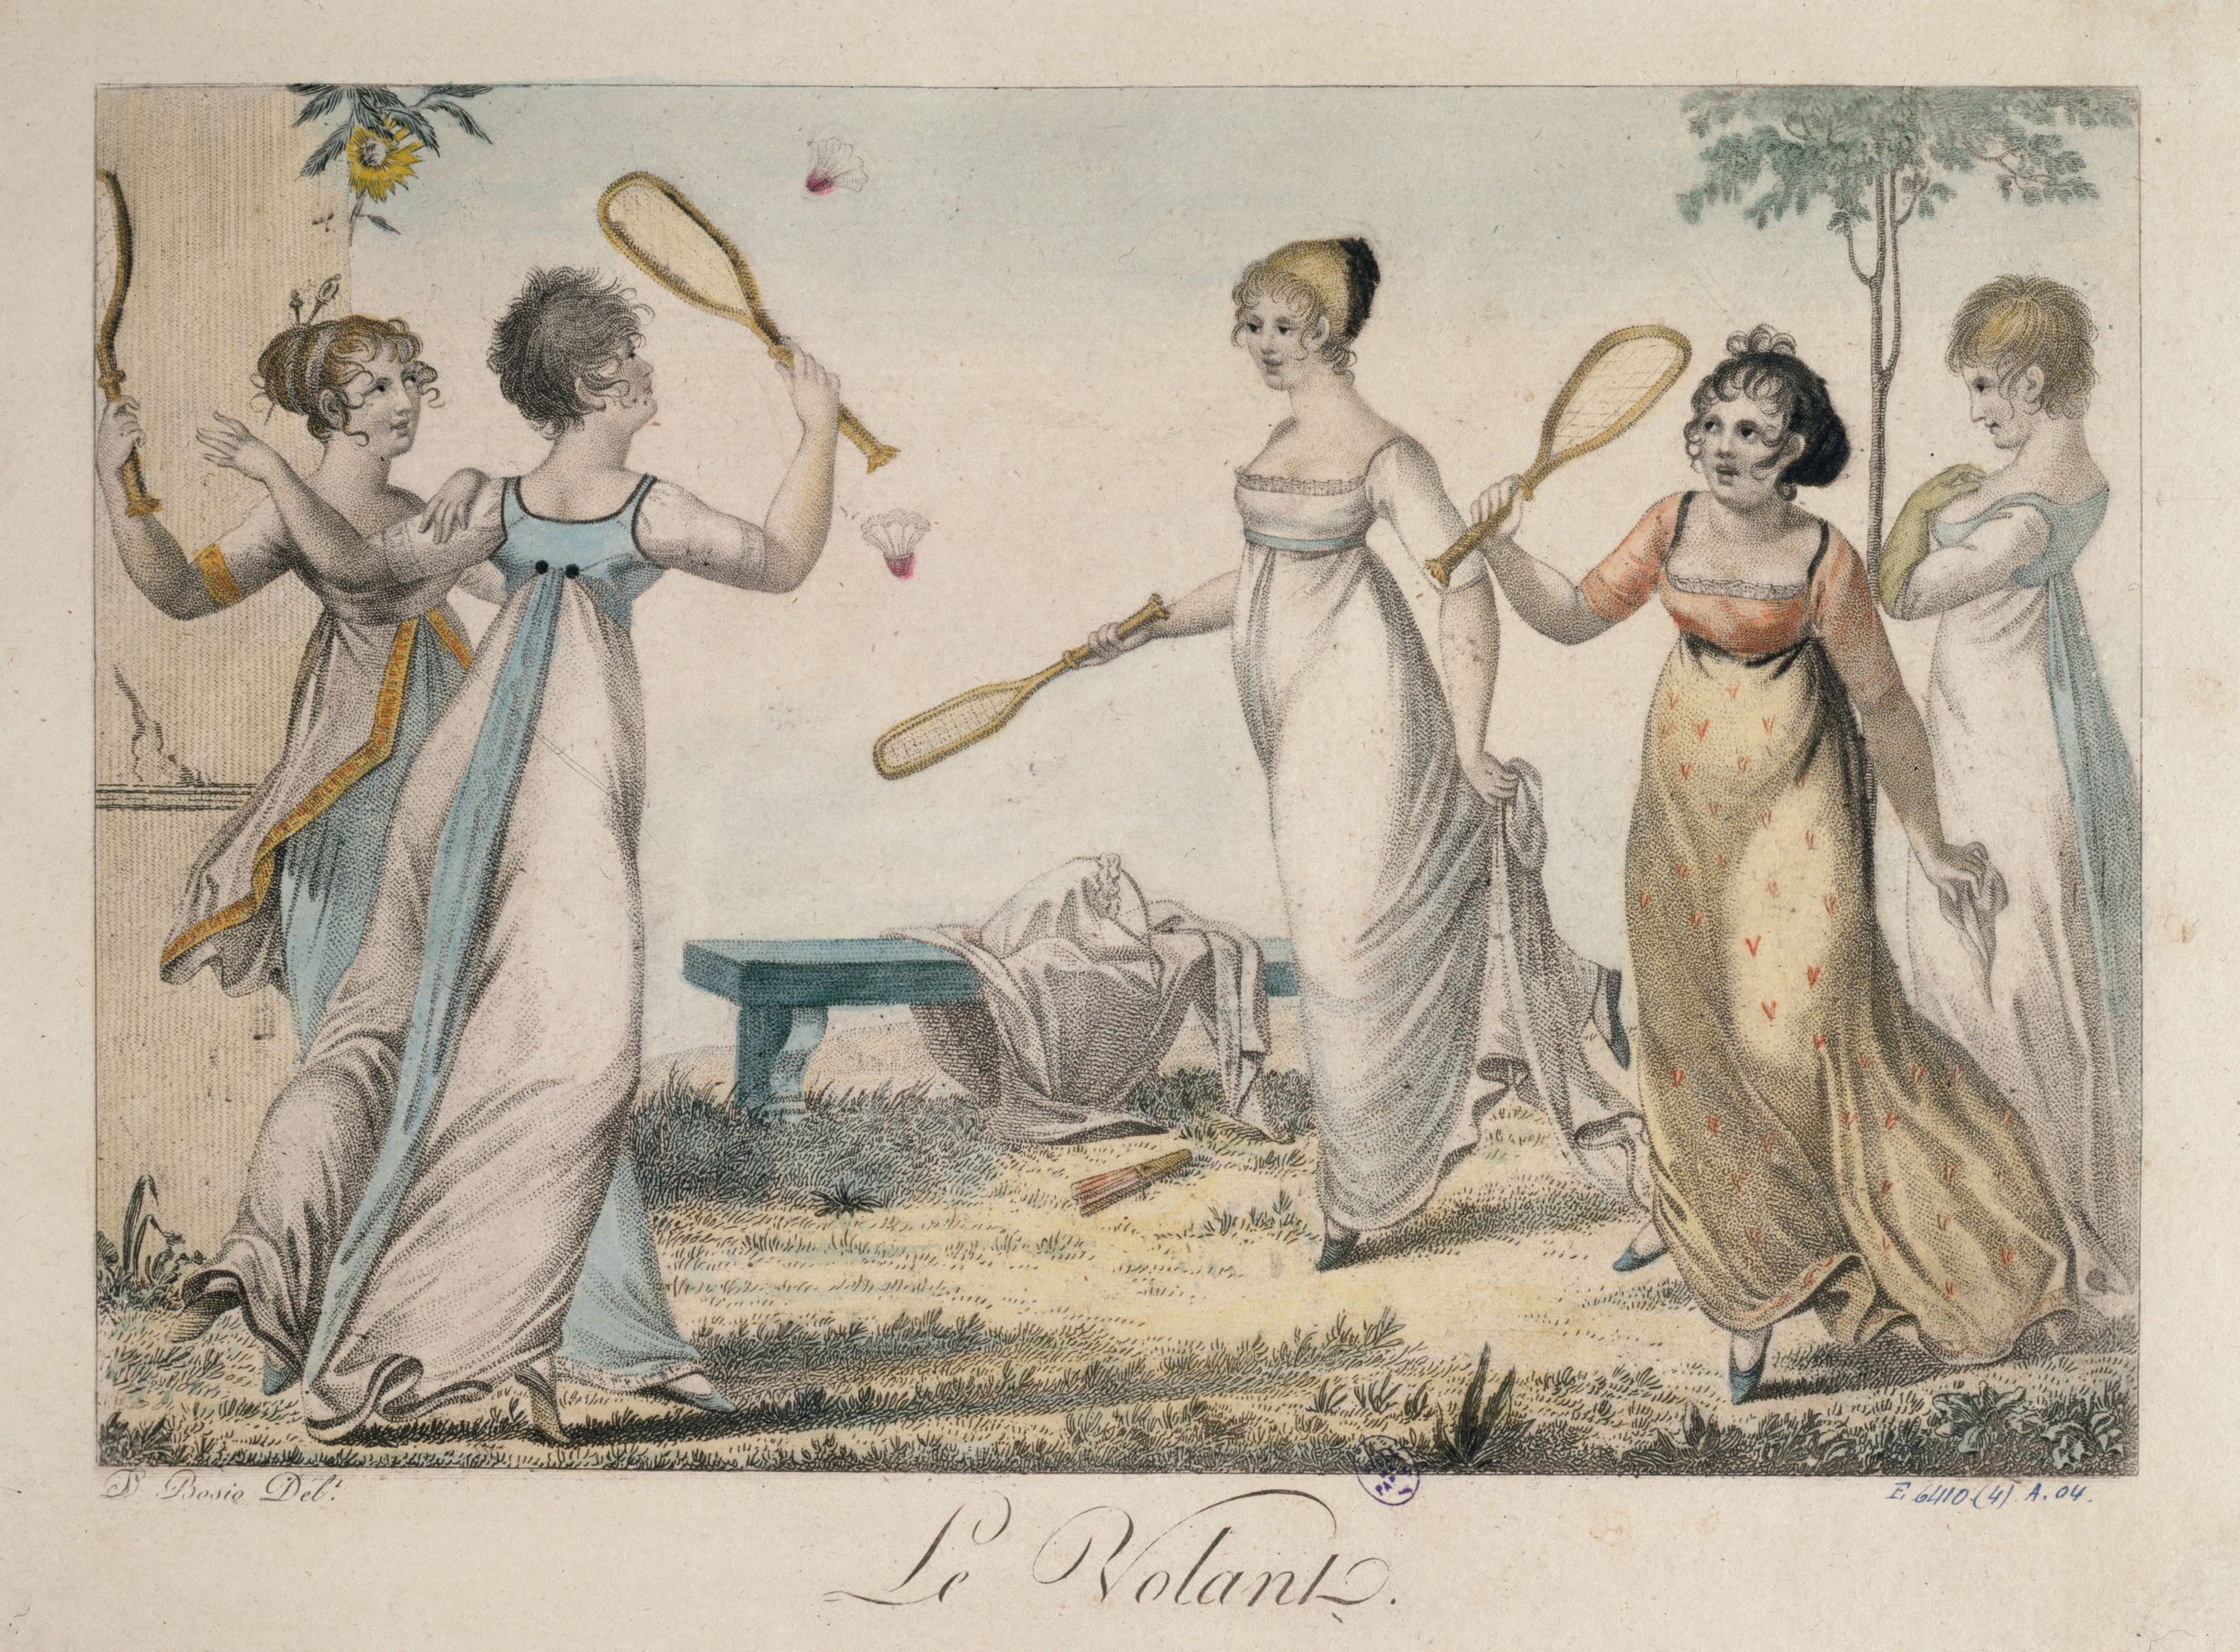 19th-century engraving showing young girls playing a game of rackets with a shuttlecock.